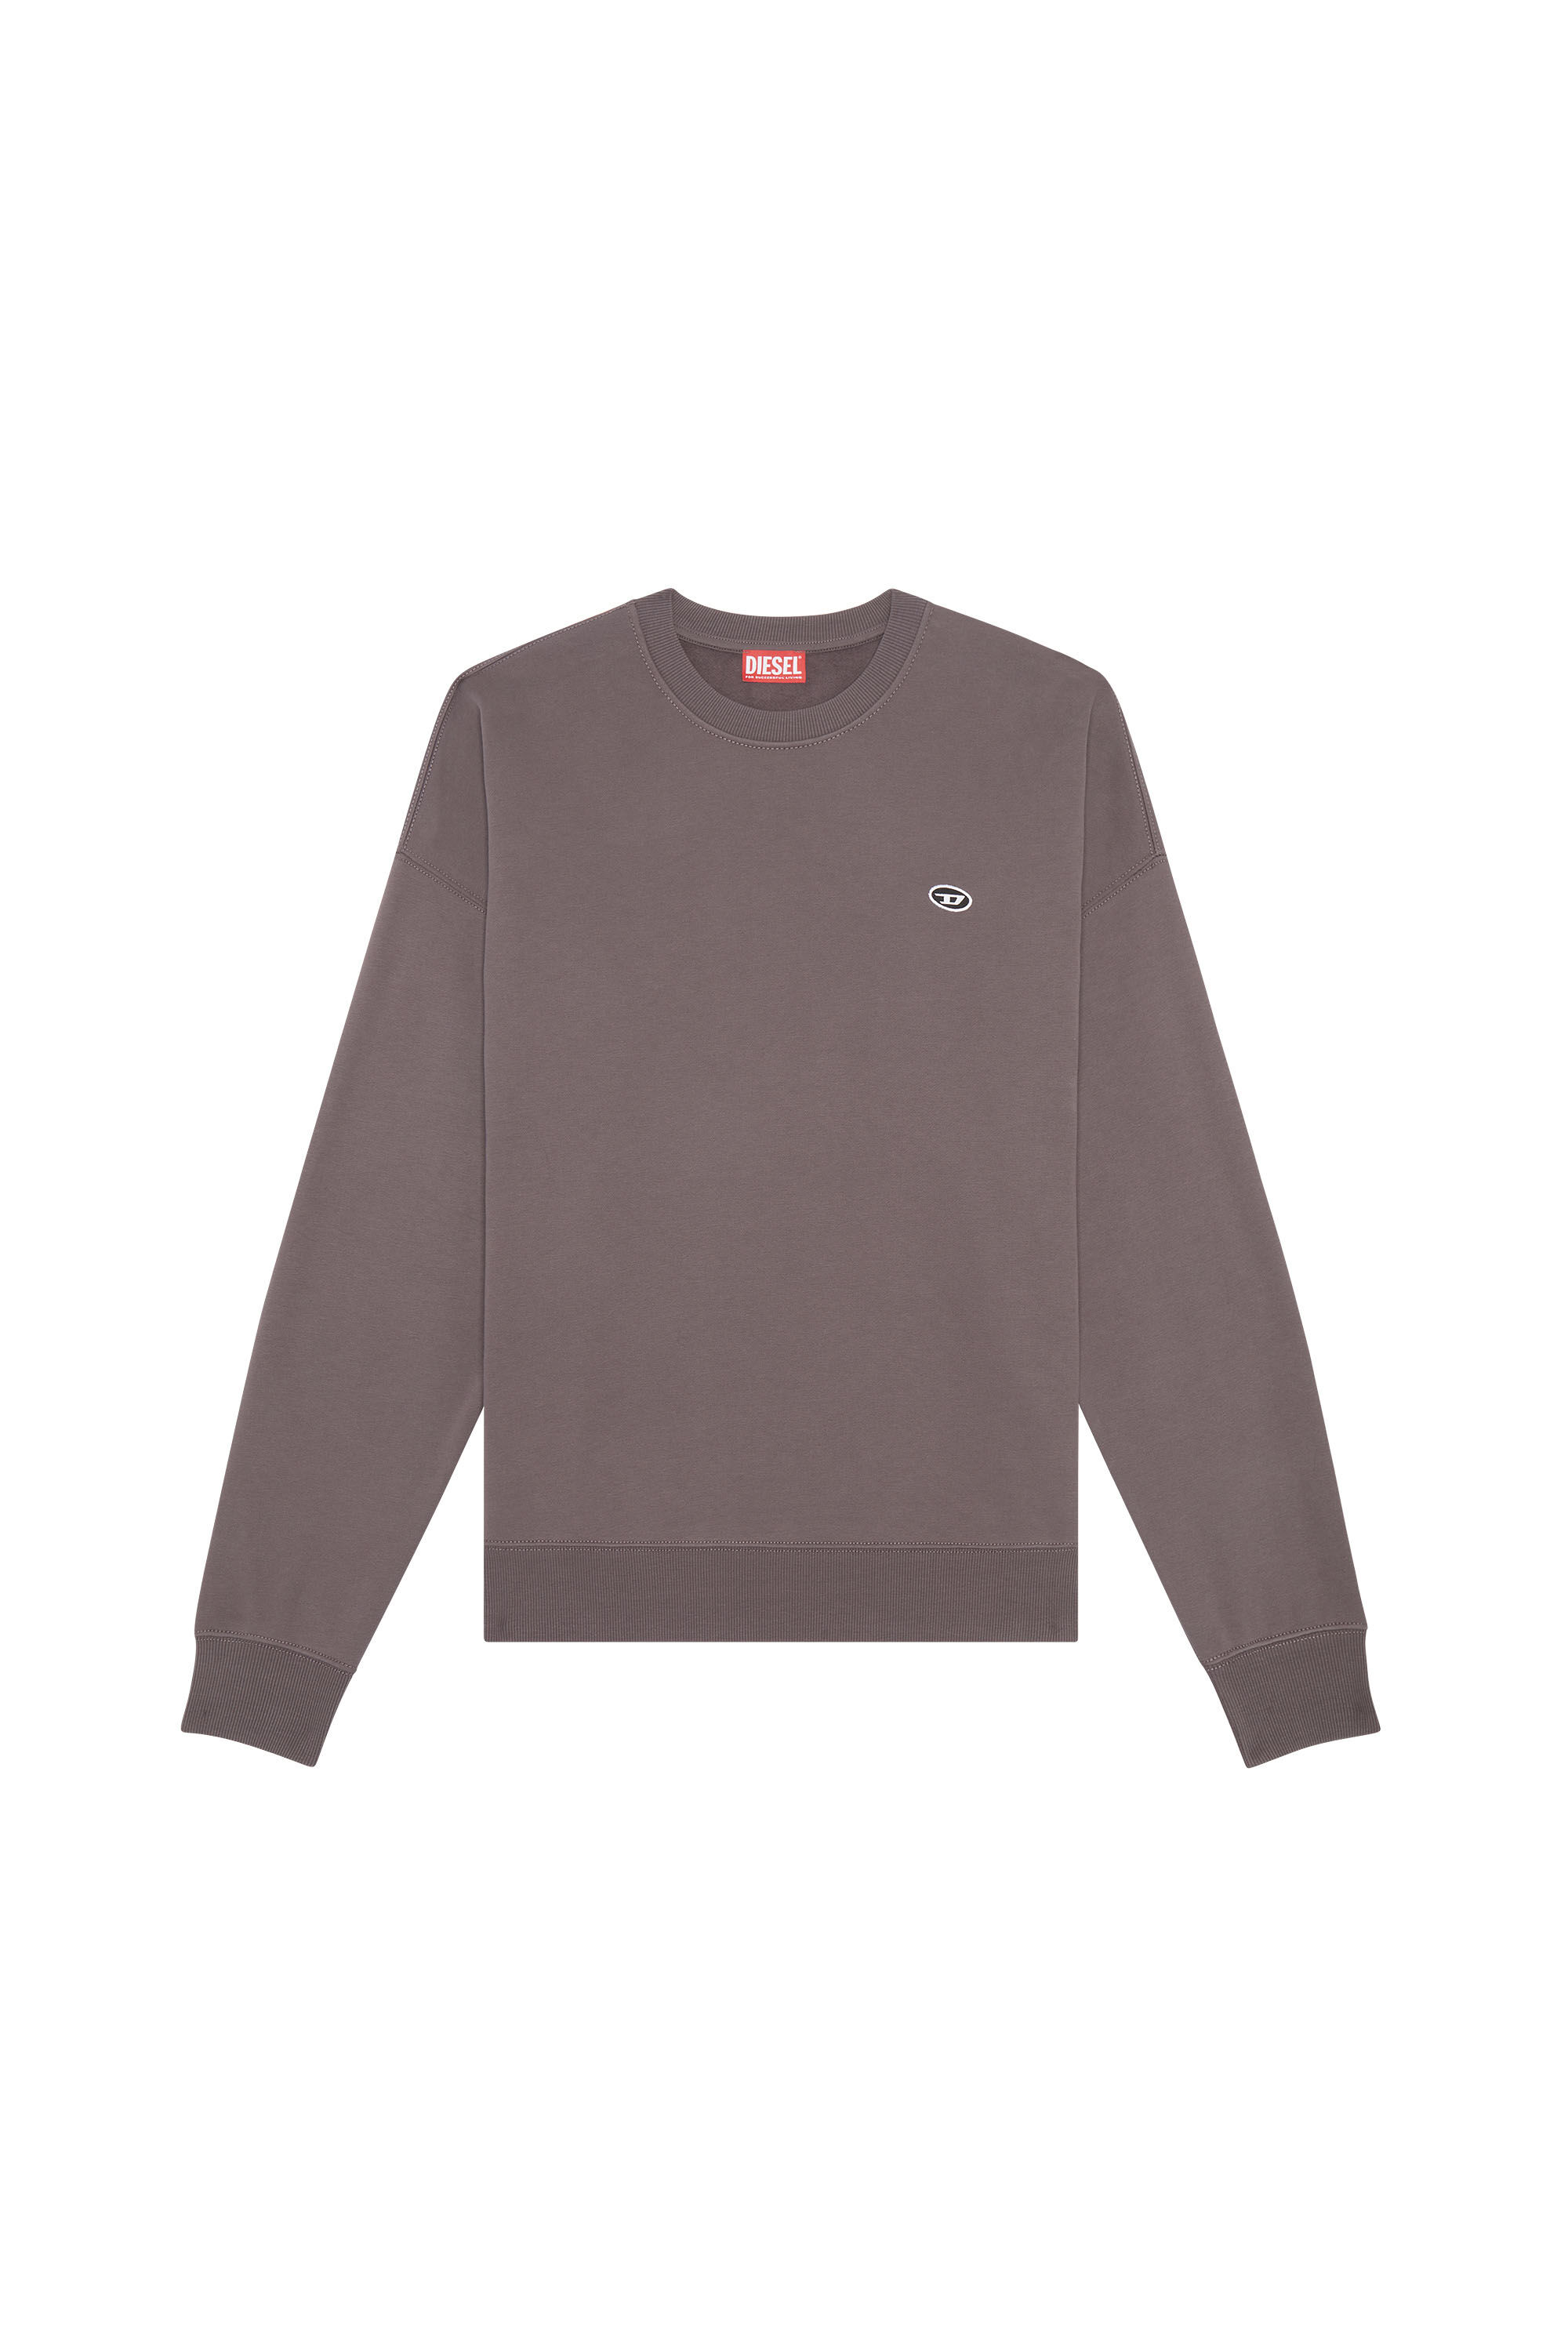 Diesel - S-ROB-DOVAL-PJ, Man Sweatshirt with oval D patch in Grey - Image 2